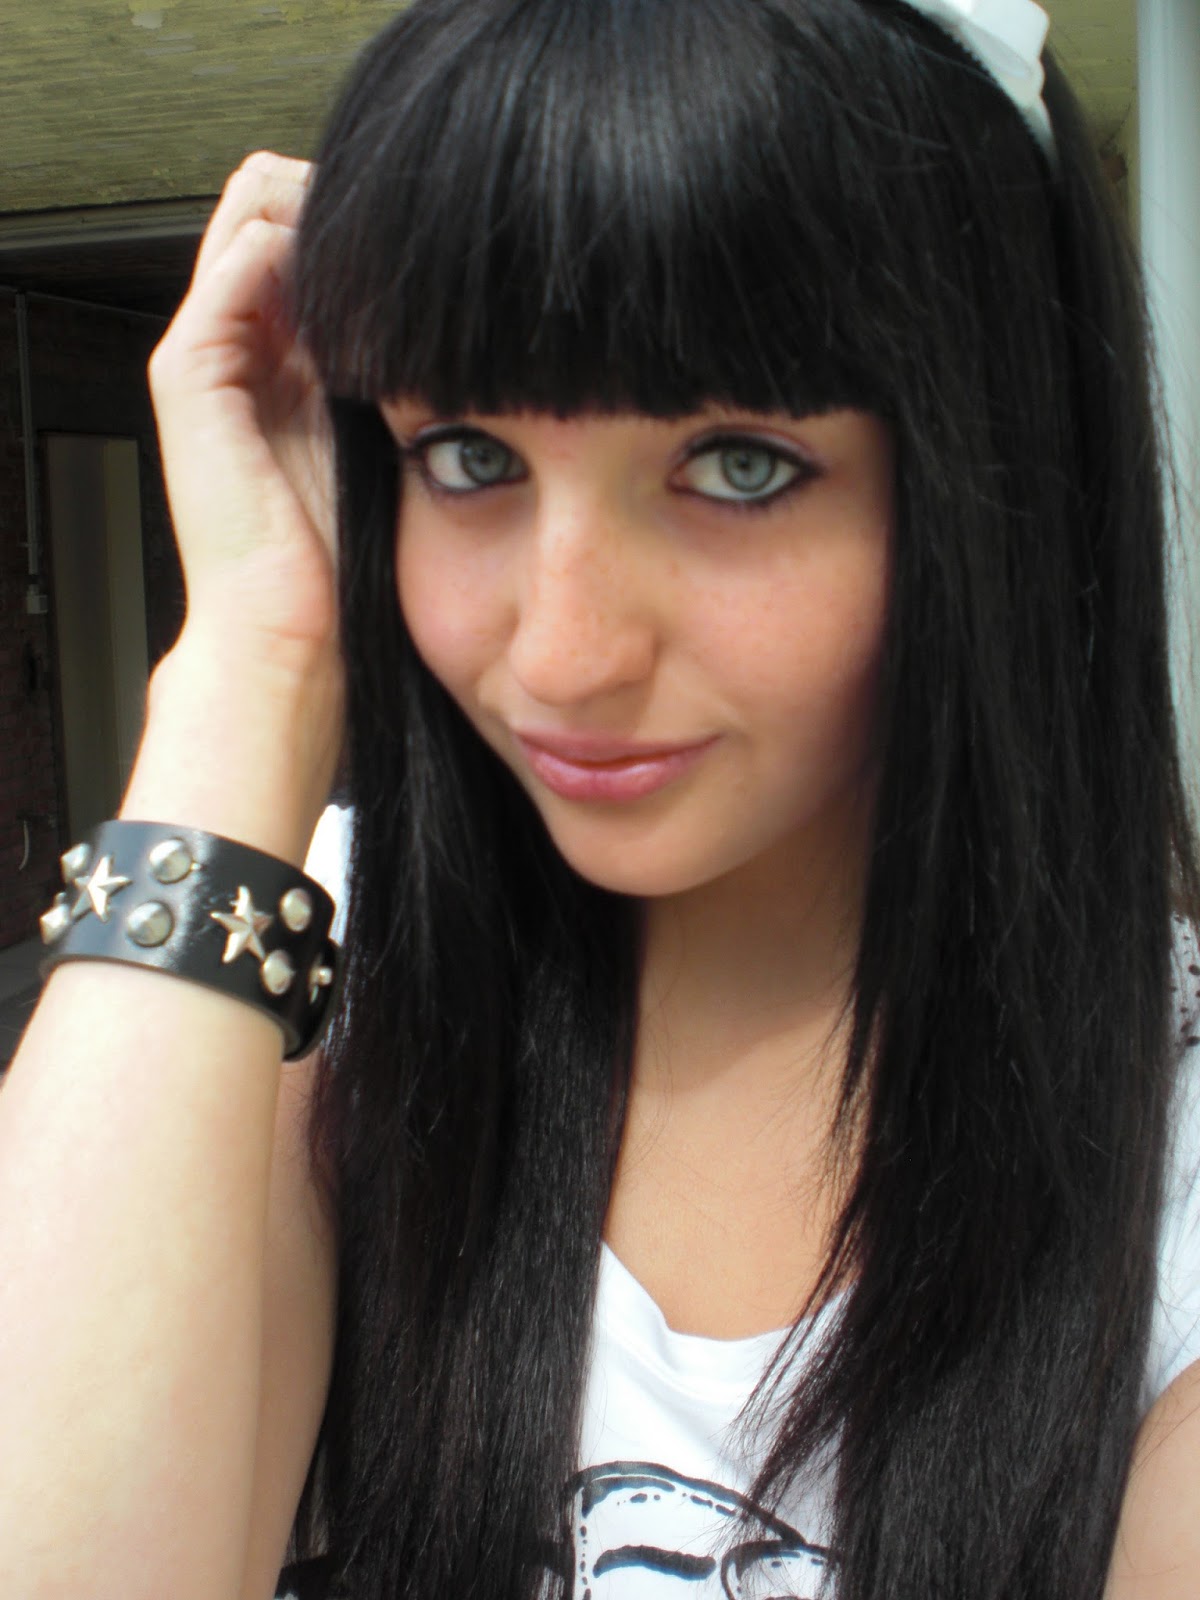 Emo Hairstyles For Girls Get An Edgy Hairstyle To Stand